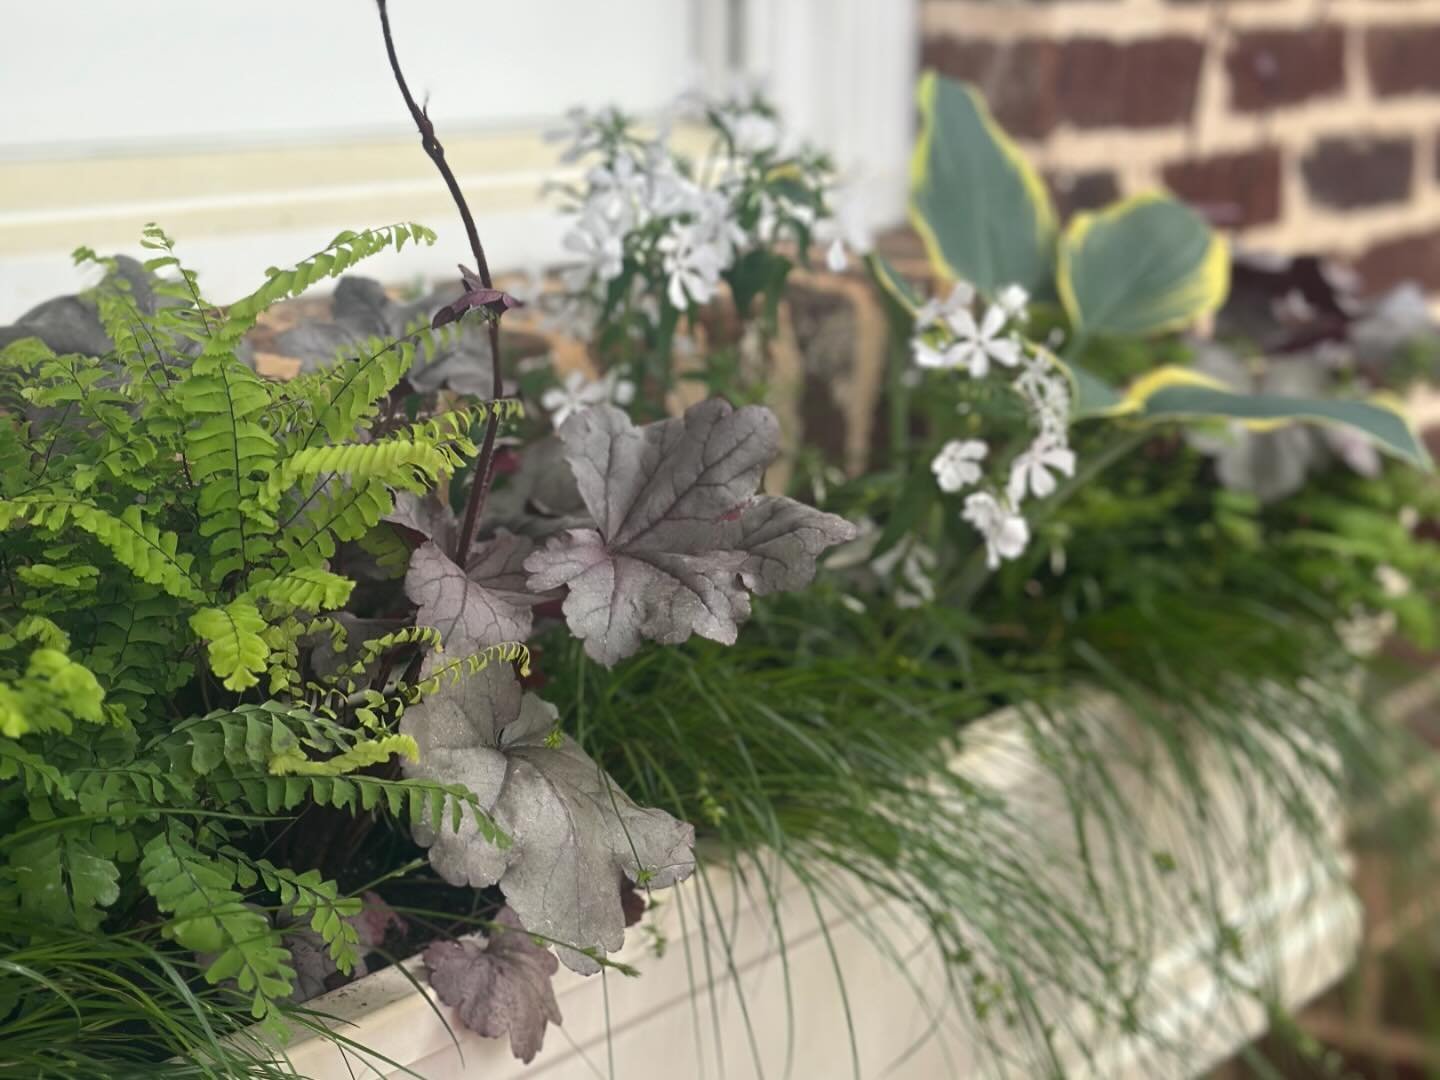 Window box fun 😍🪴Window boxes are a great option to dress up any house, but can be especially fun for those who don&rsquo;t have space to plant a traditional garden. They can act as mini perennial borders, right outside your window! Come see this o